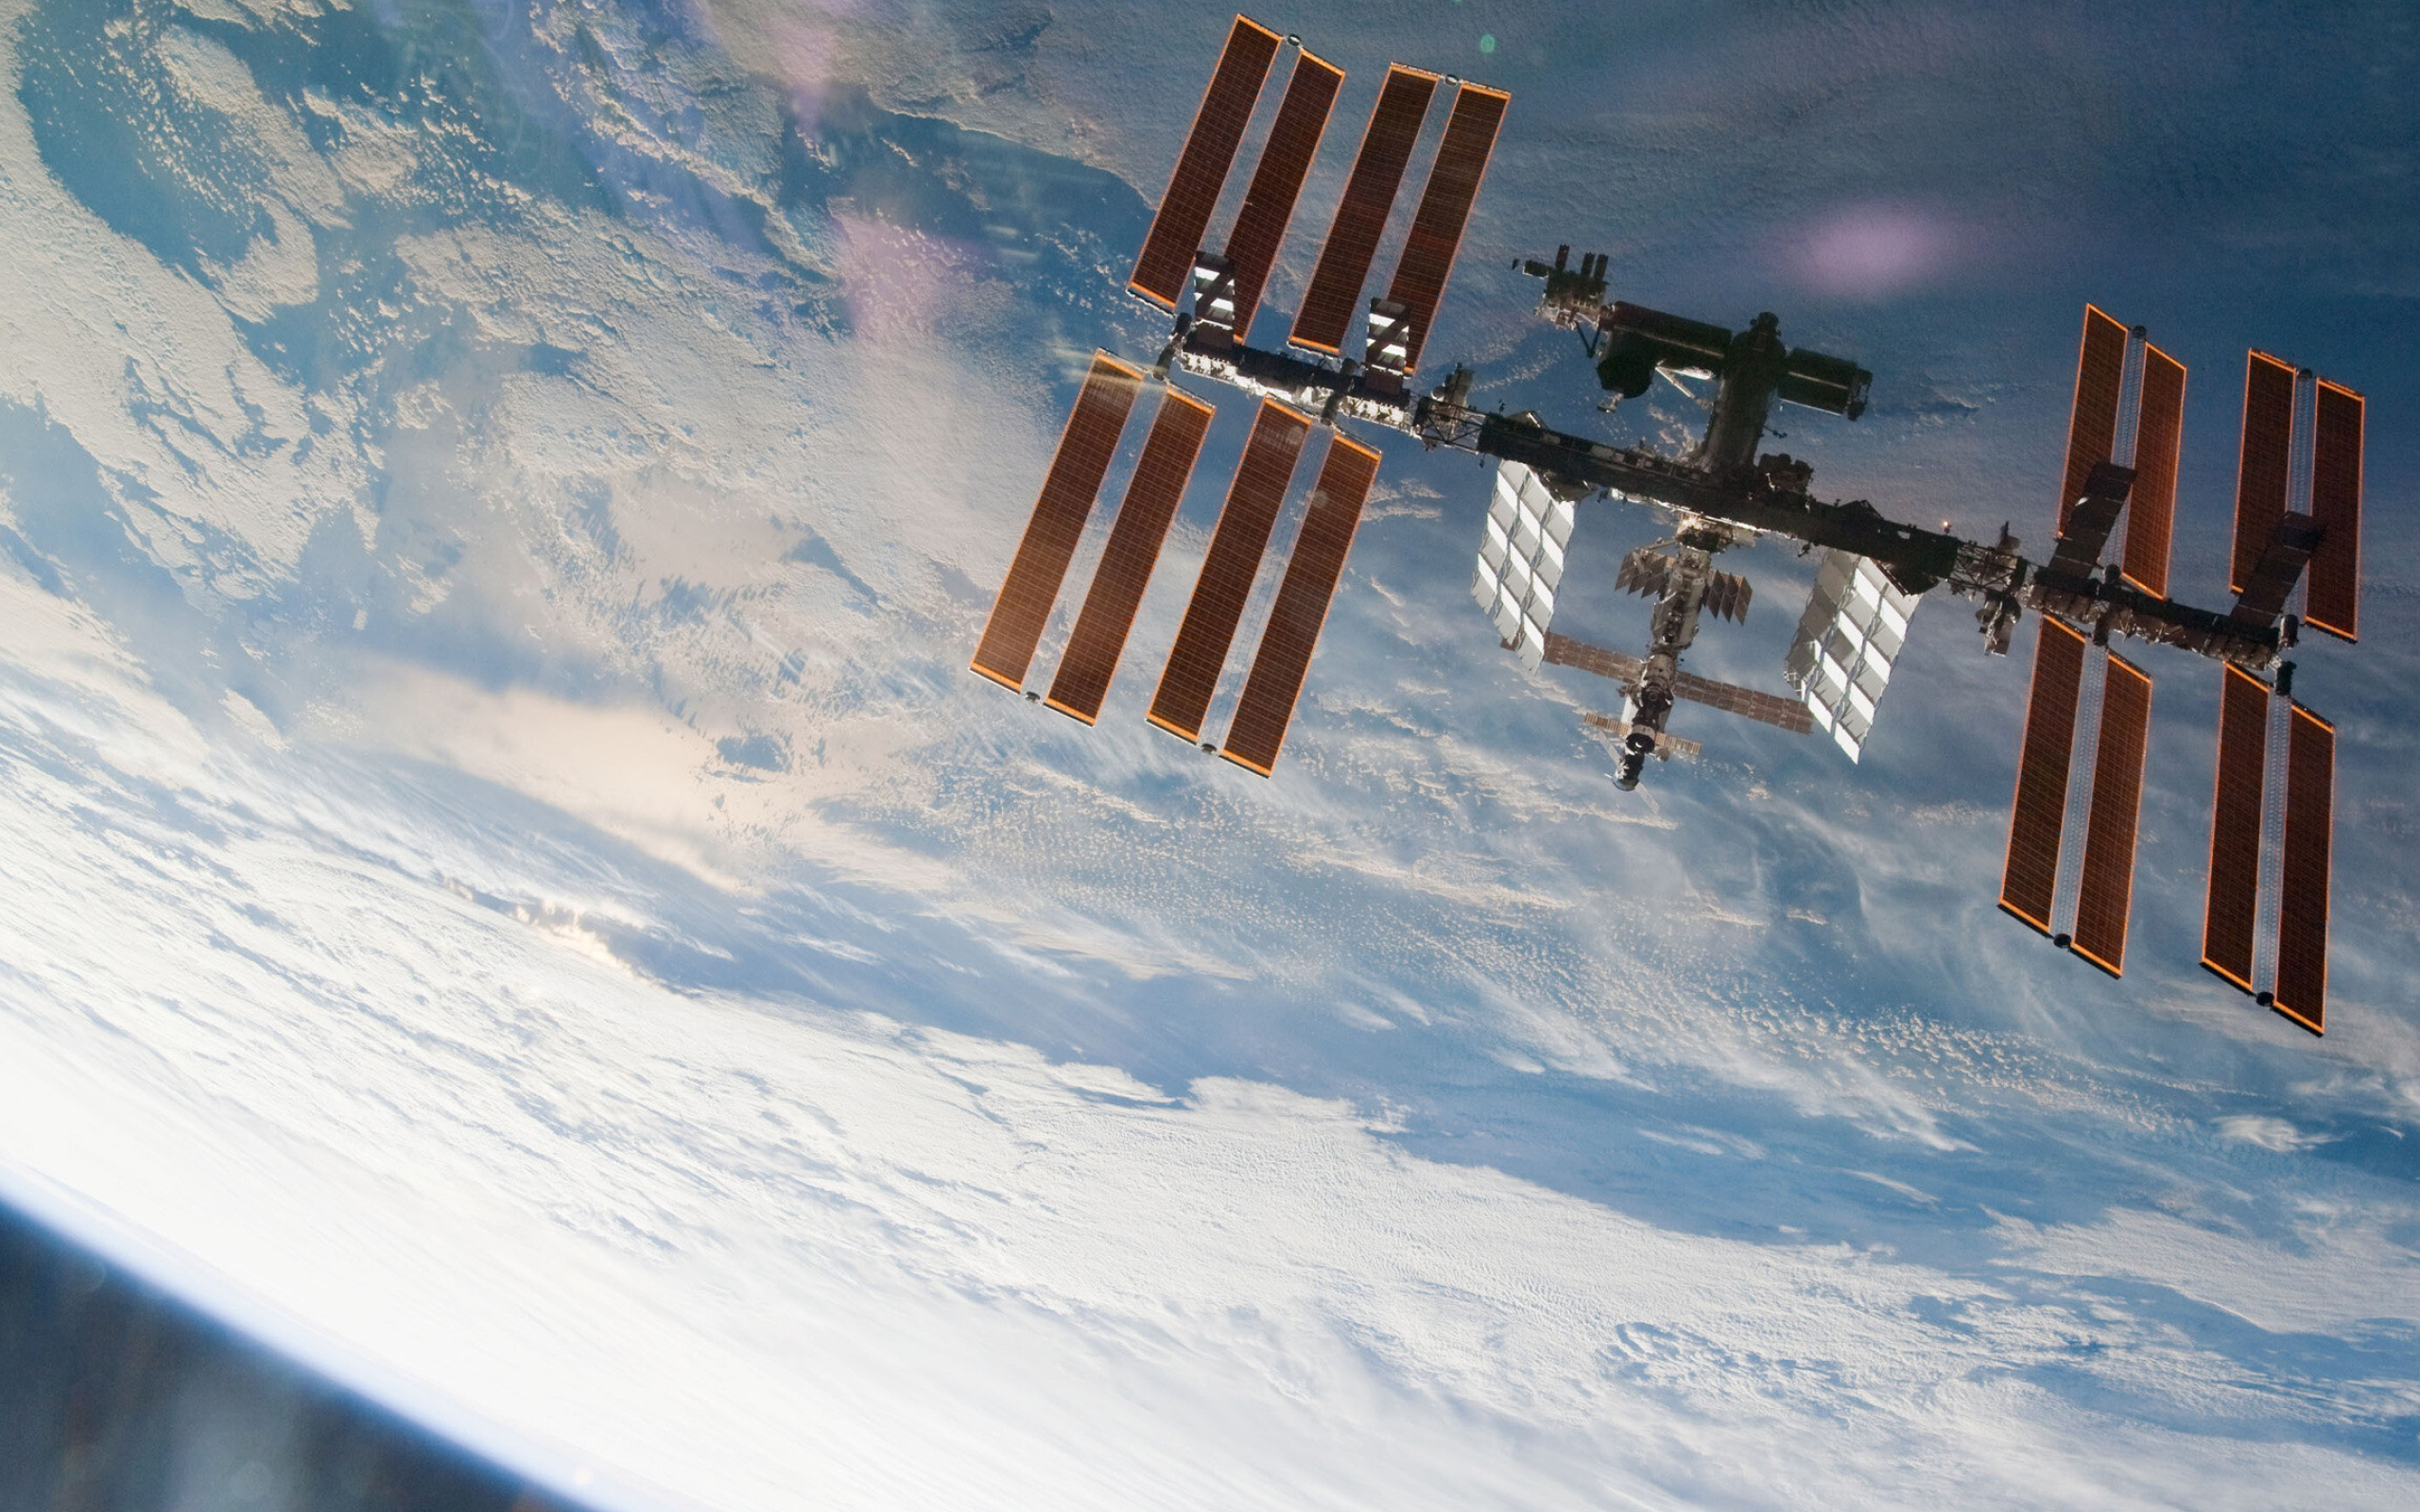 Space Station: A habitable artificial satellite, ISS, Low Earth orbit, Cosmos. 2560x1600 HD Wallpaper.